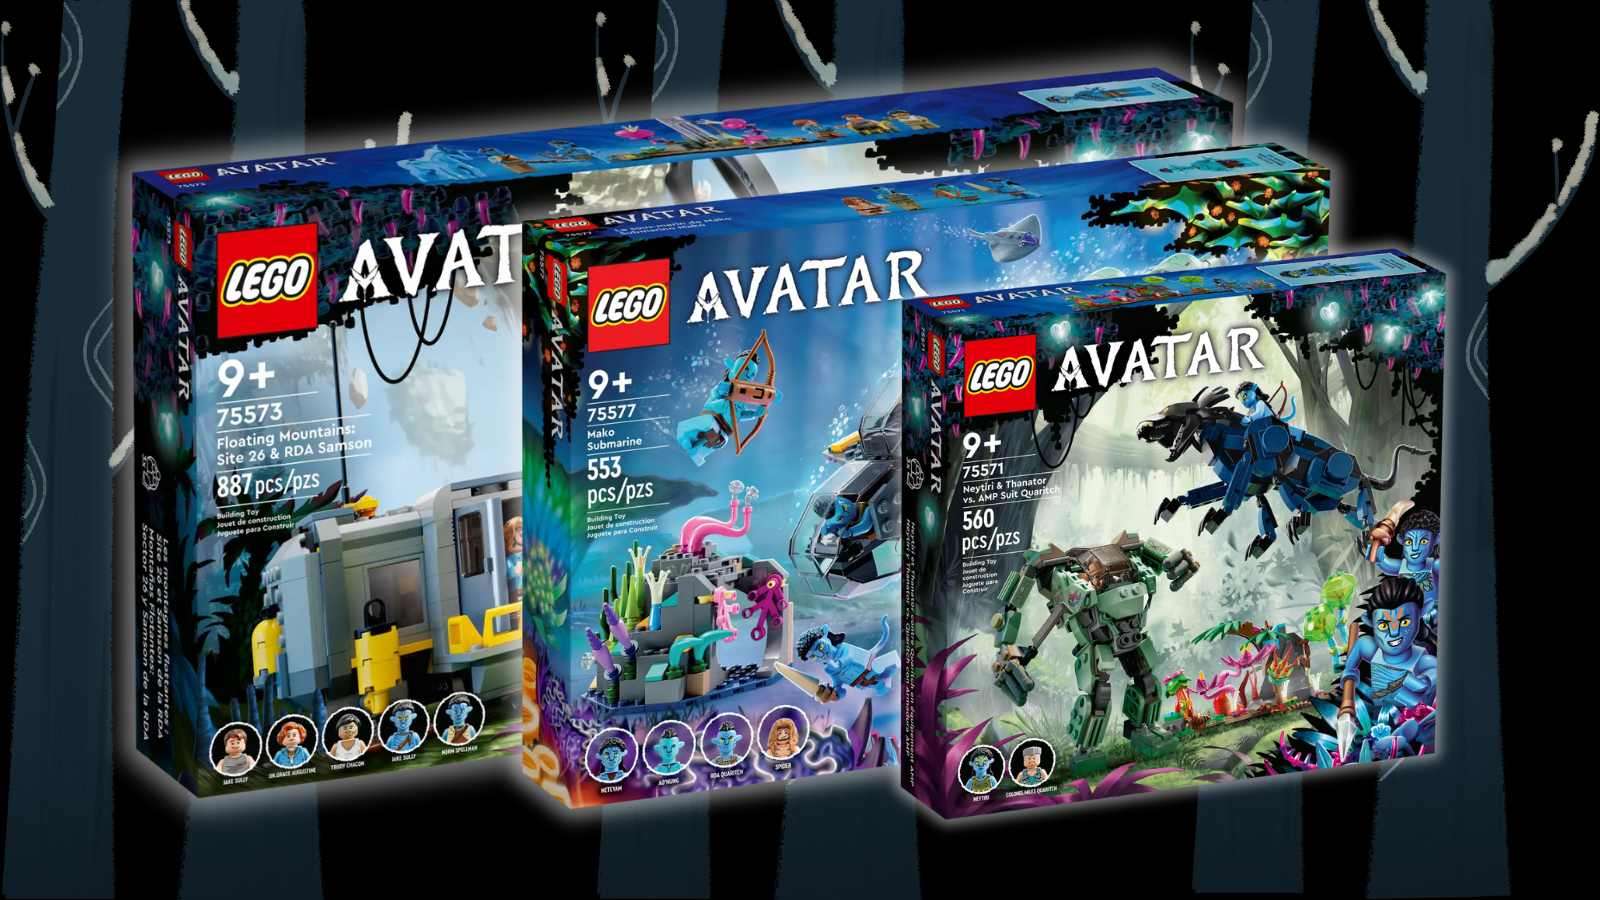 LEGO Avatar sets on black background with rain forest graphic.